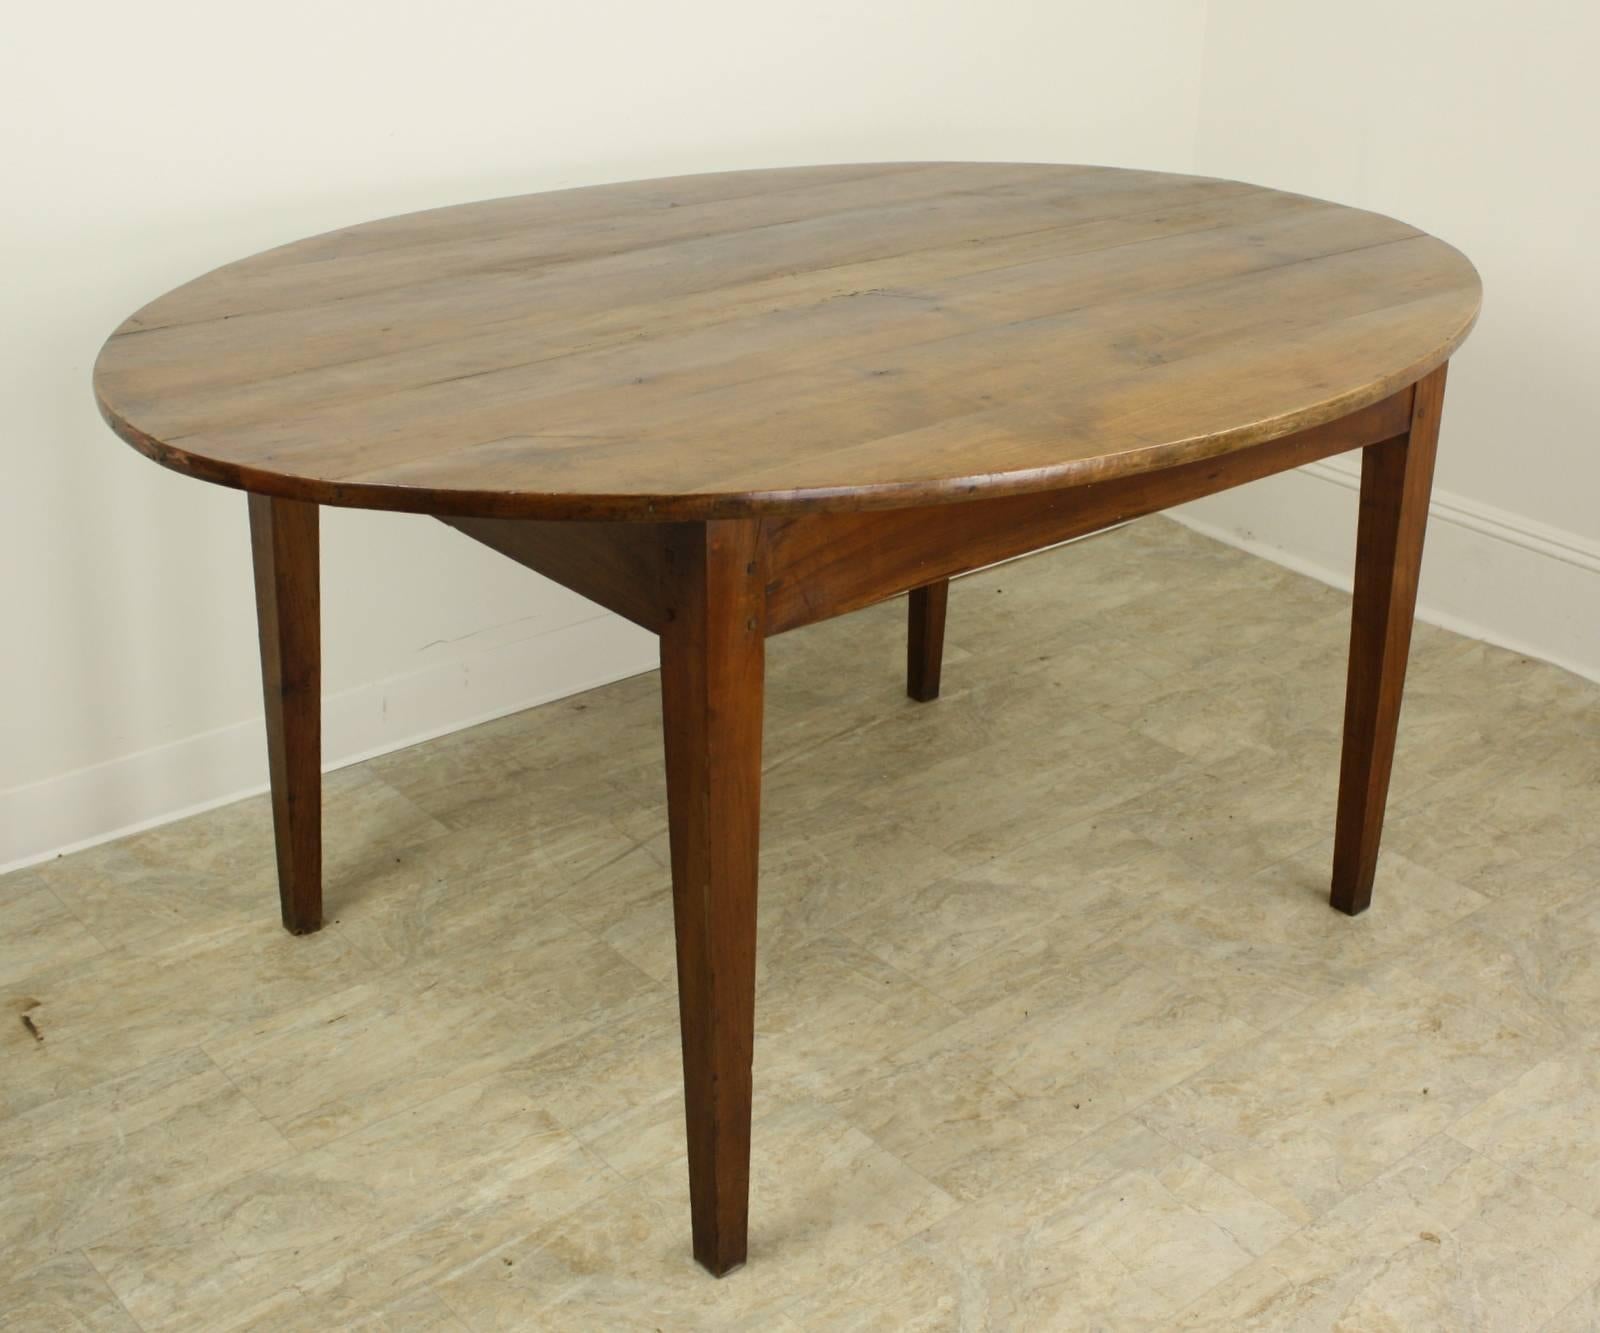 A simple and elegant oval dining table in mellow cherry with warm patina. The top is pretty and in good condition, nicely pegged at the legs. Apron height of 24.5